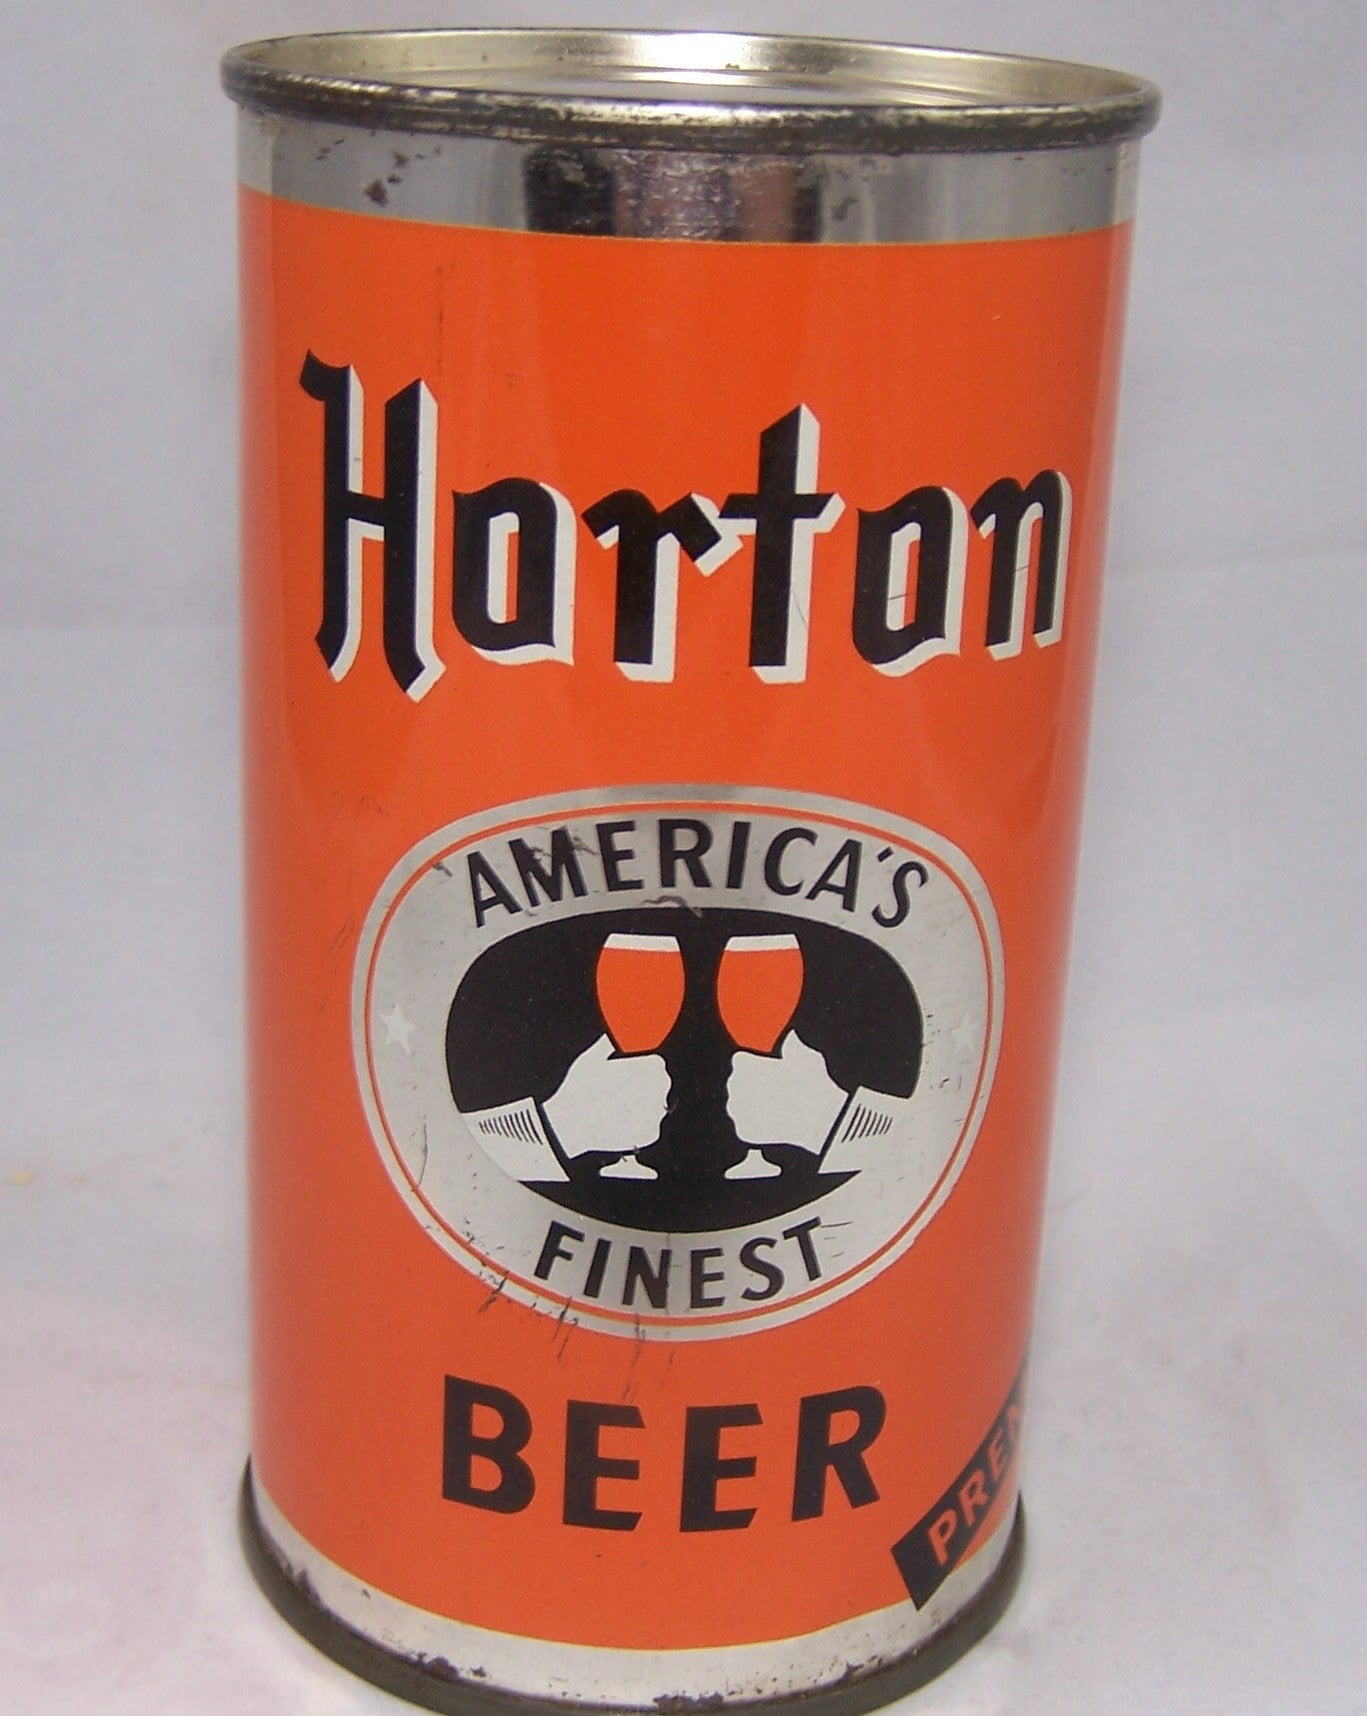 Horton Beer USBC 84-03, Grade 1 to 1/1+ Sold on 05/26/18